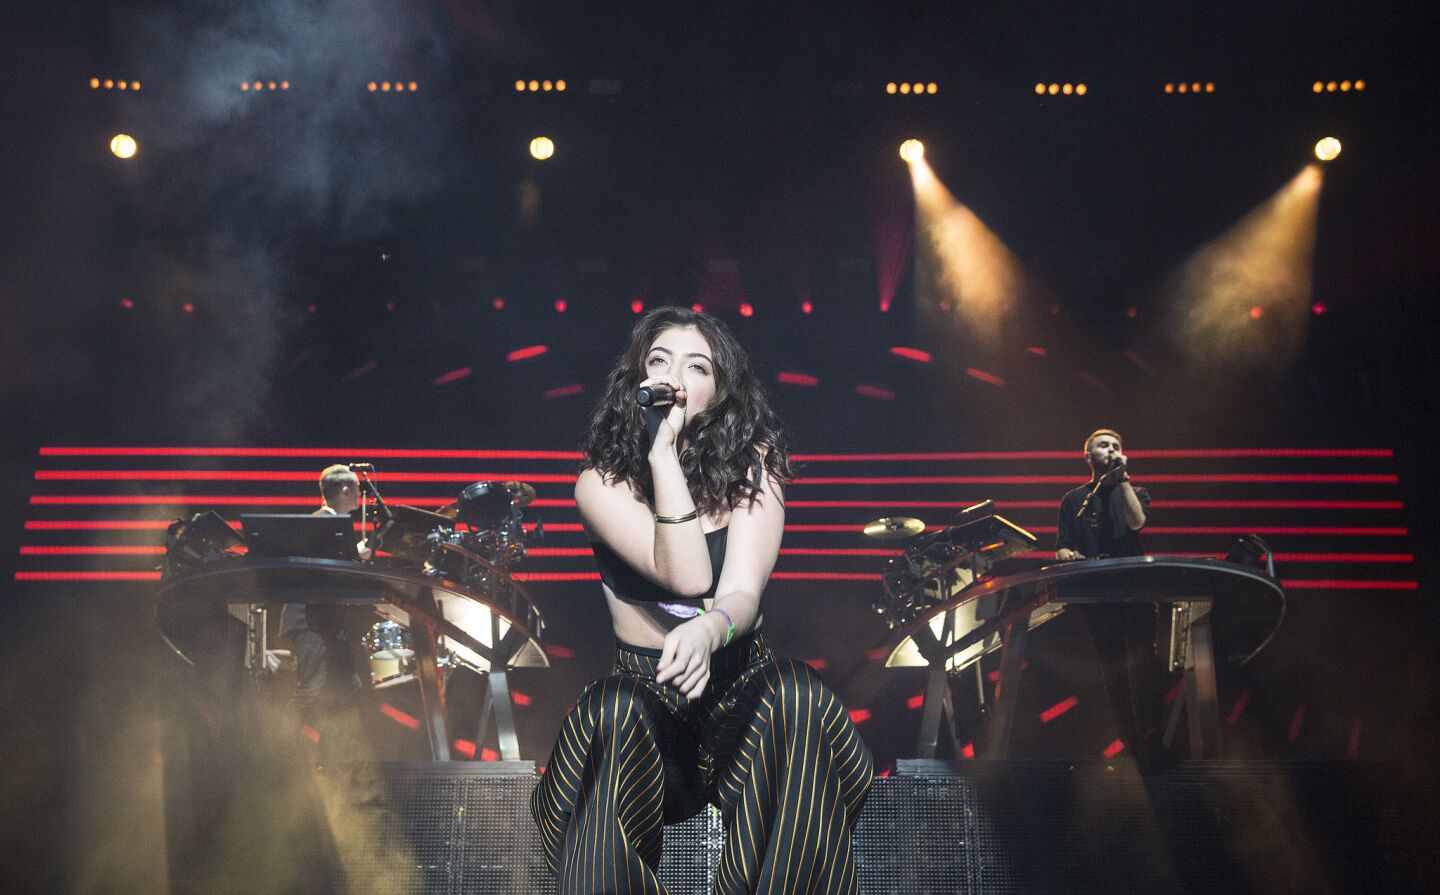 Lorde joins Disclosure on stage.